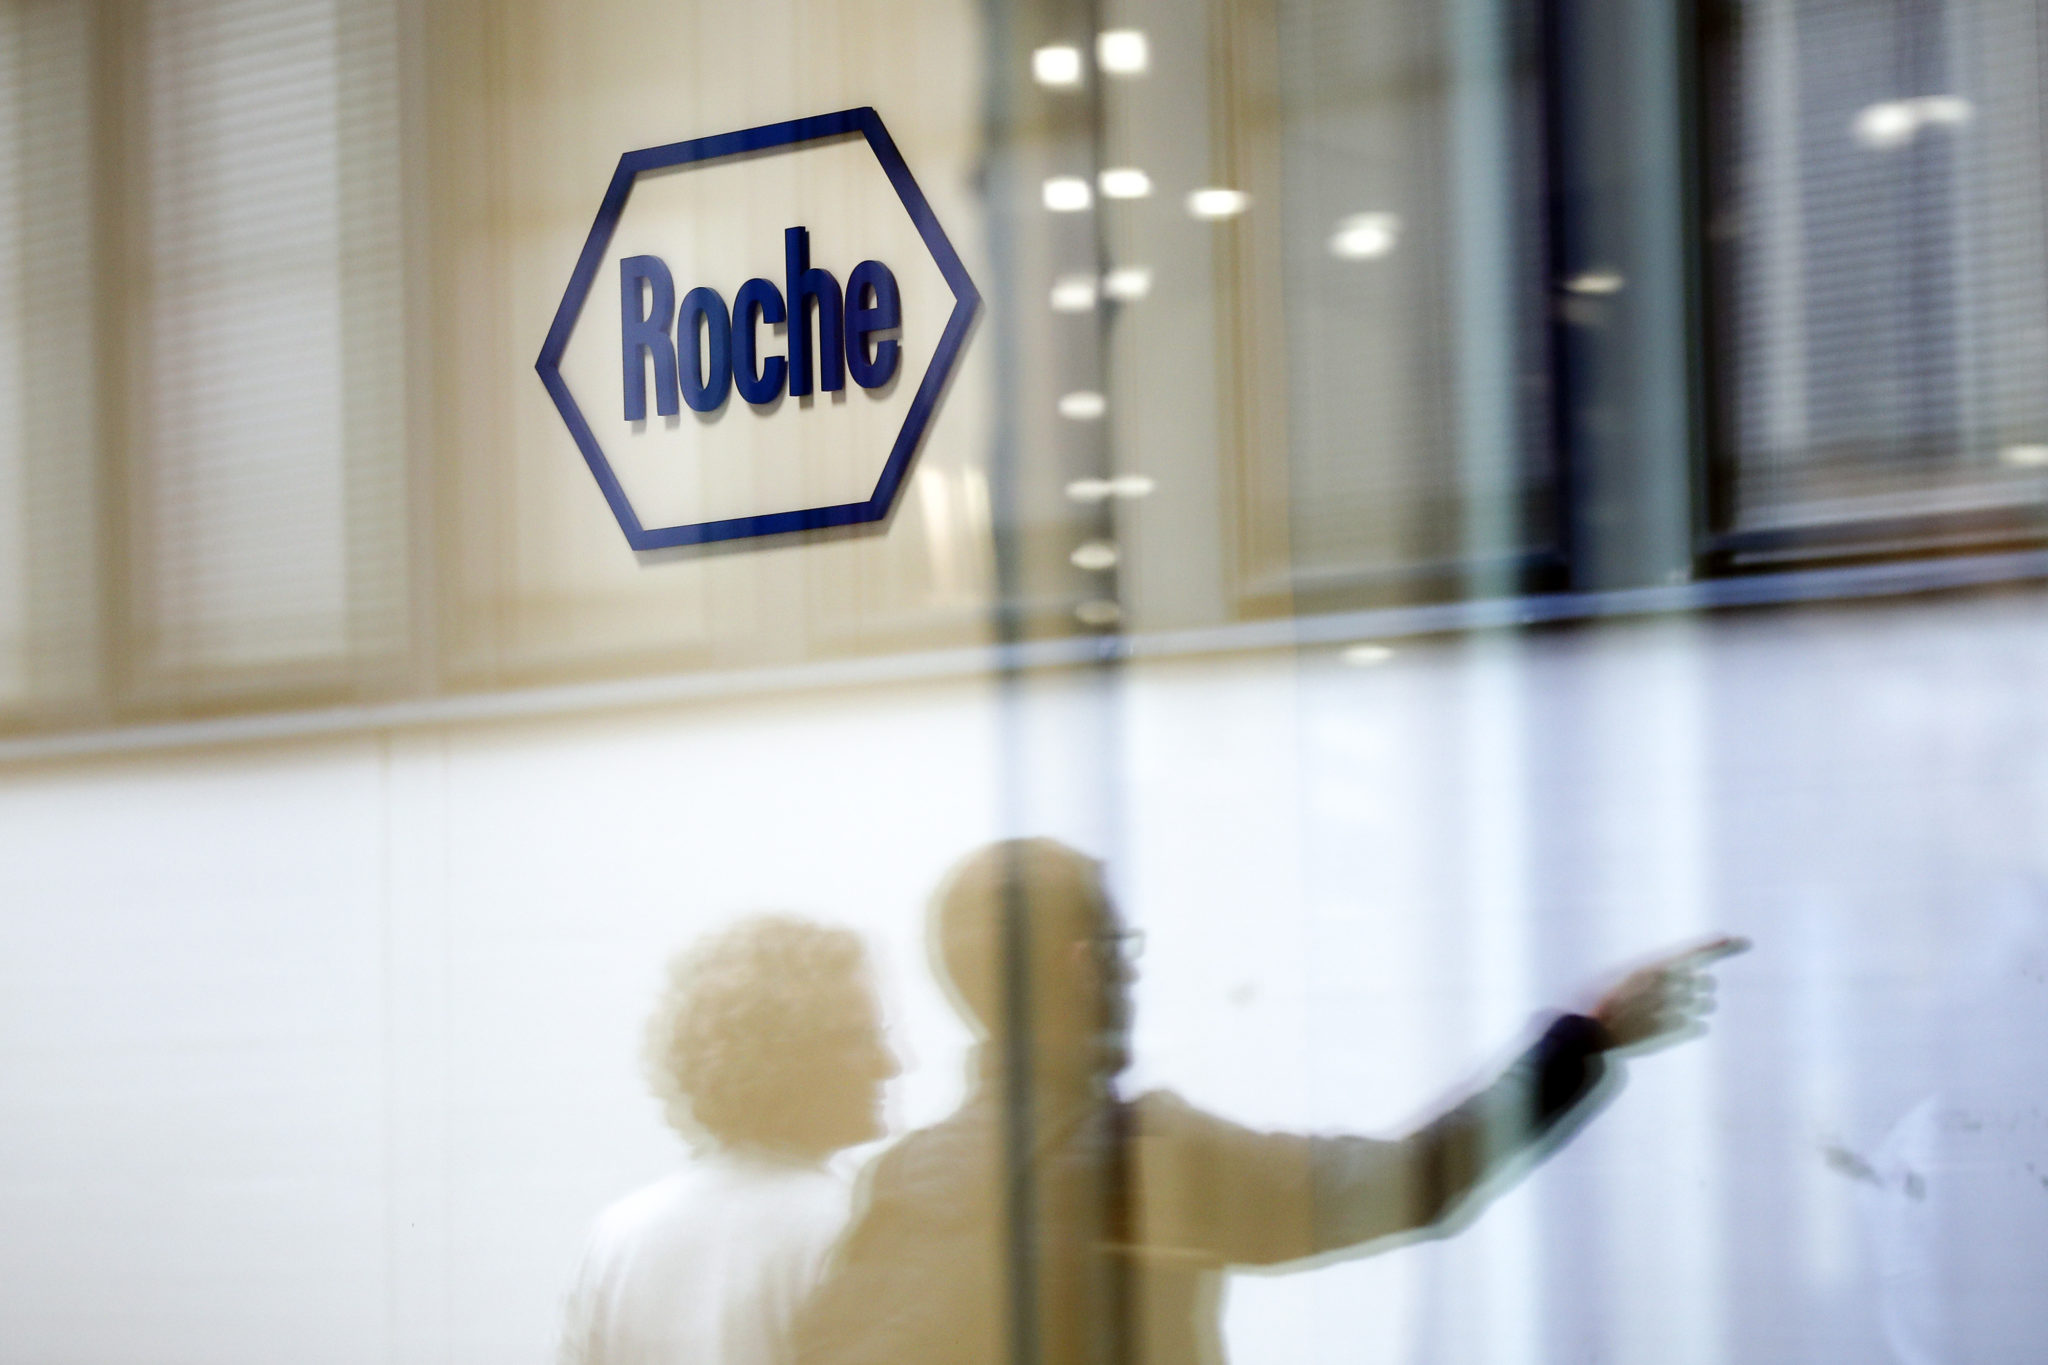 Roche Holding AG Chief Executive Officer Severin Schwan Interview